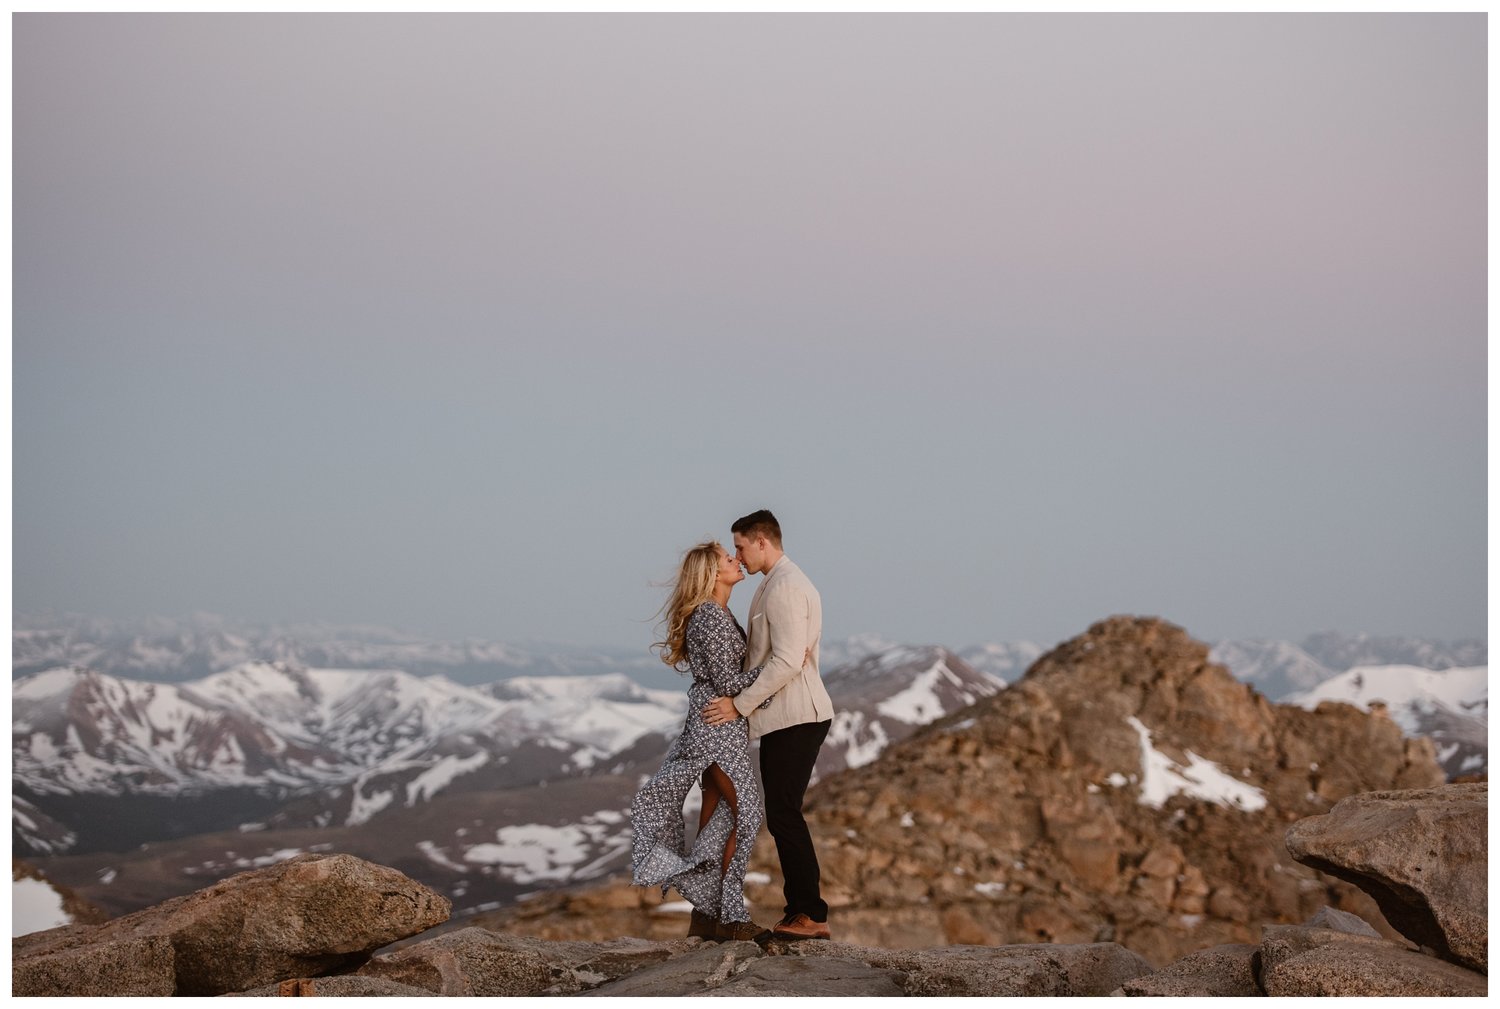 Couple embraces at the top of Mt. Evans in Colorado.